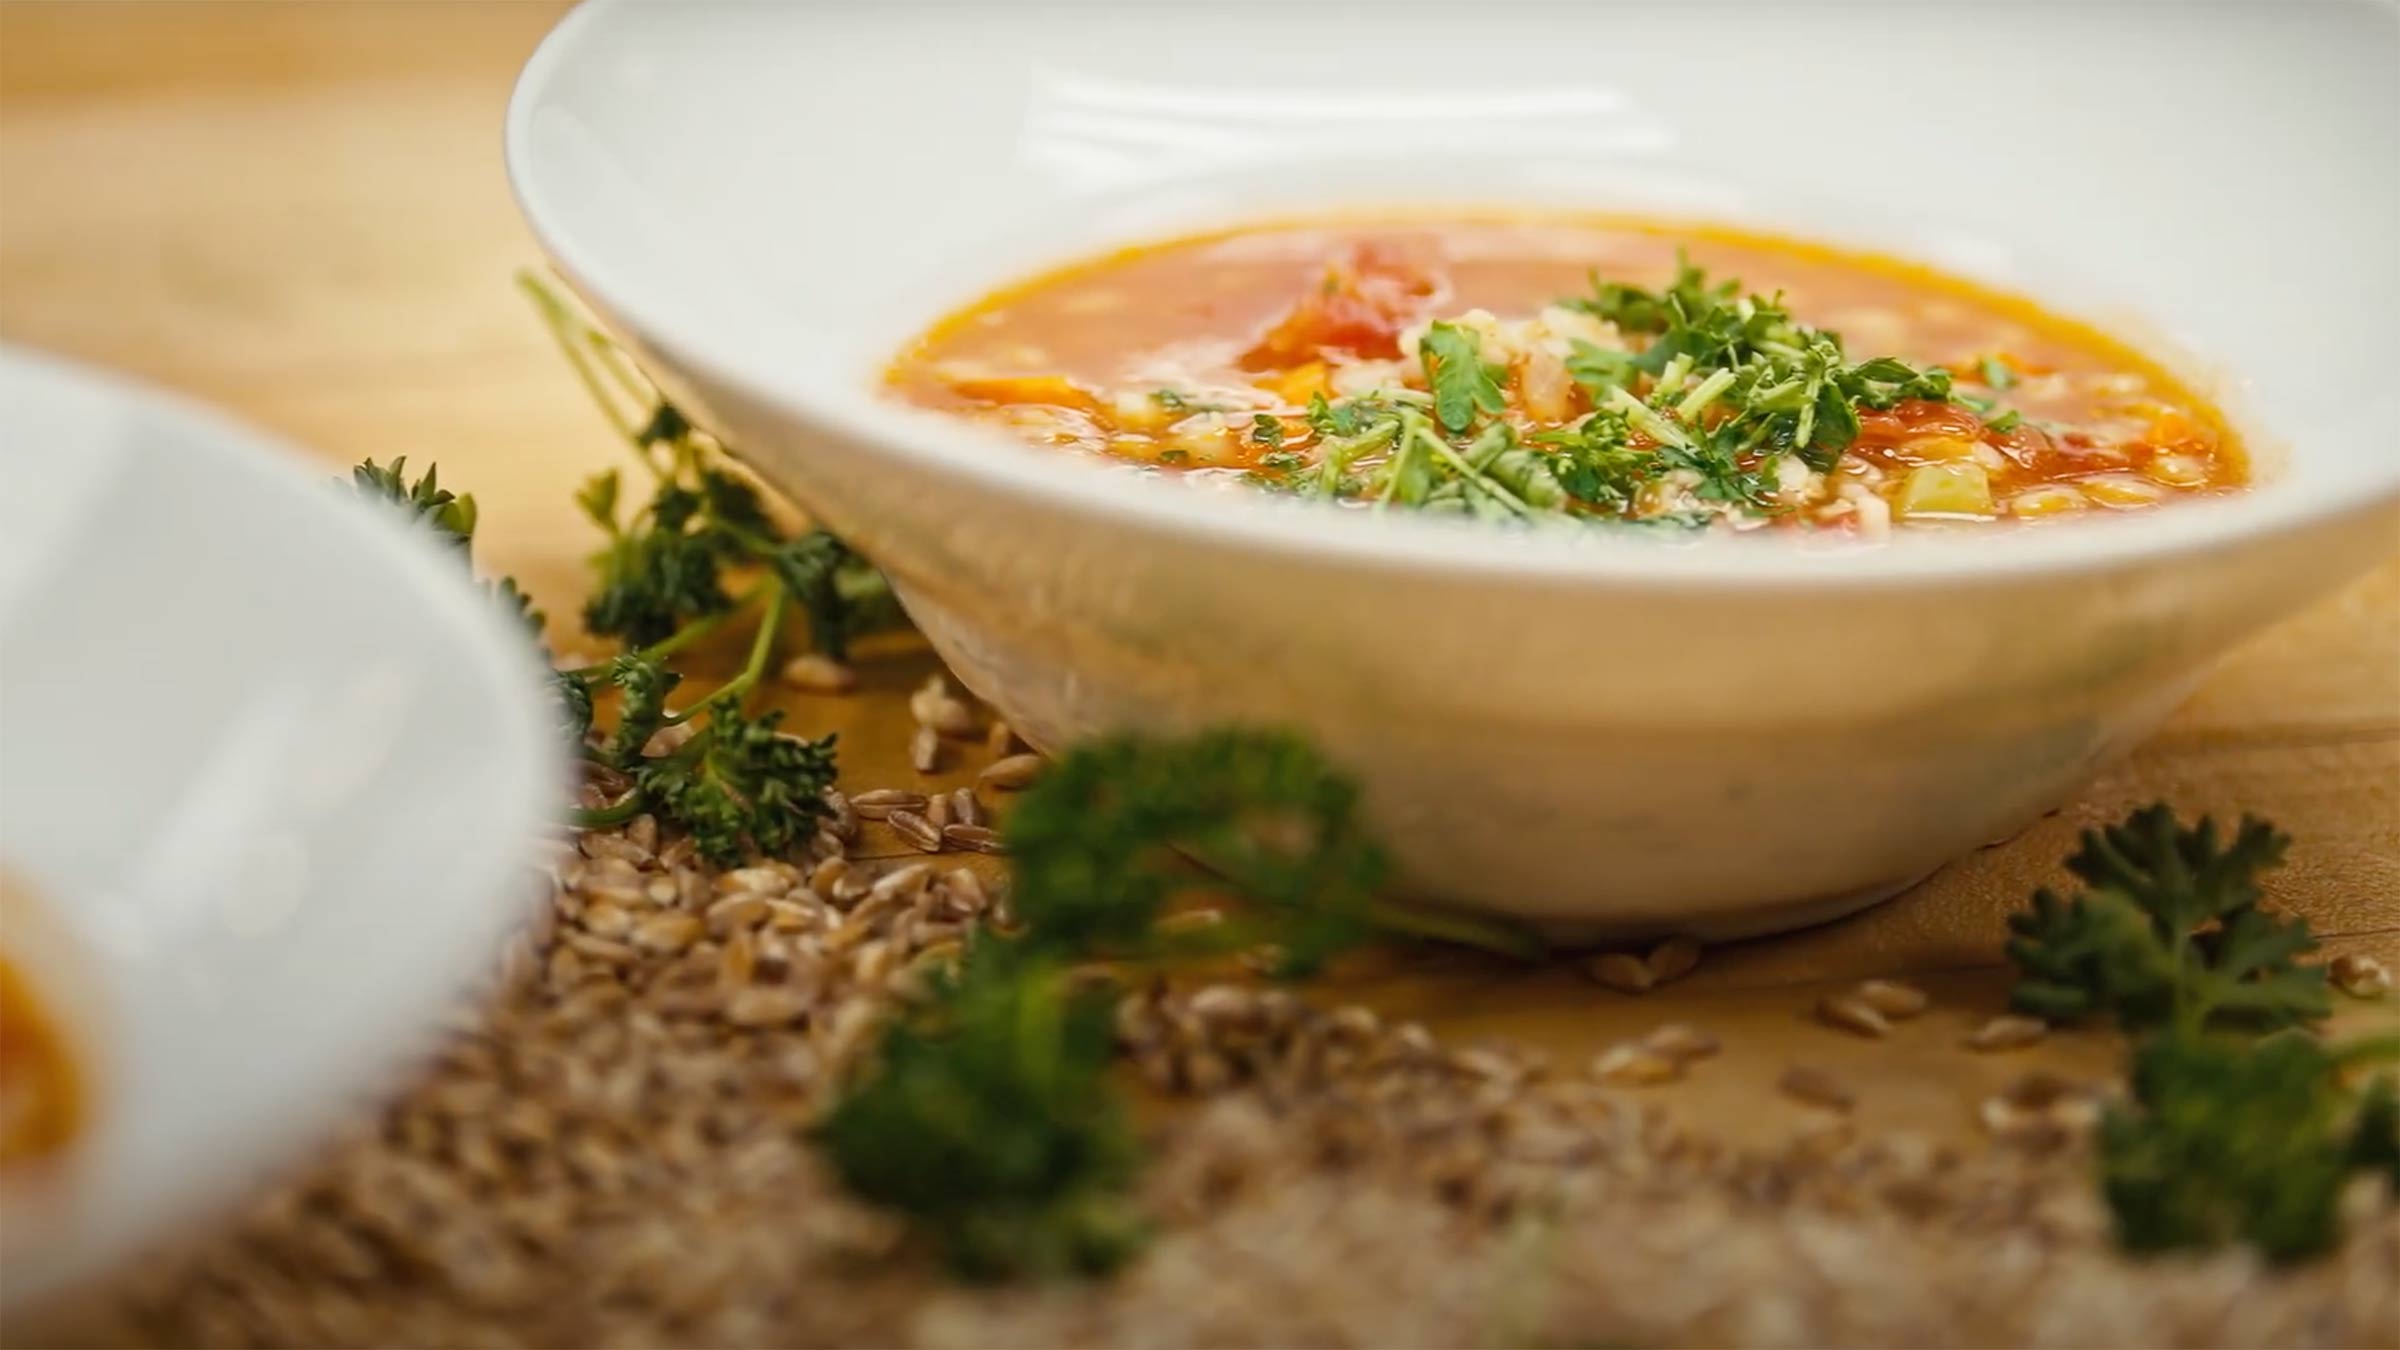 Recipe from our chefs: Farro vegetable soup